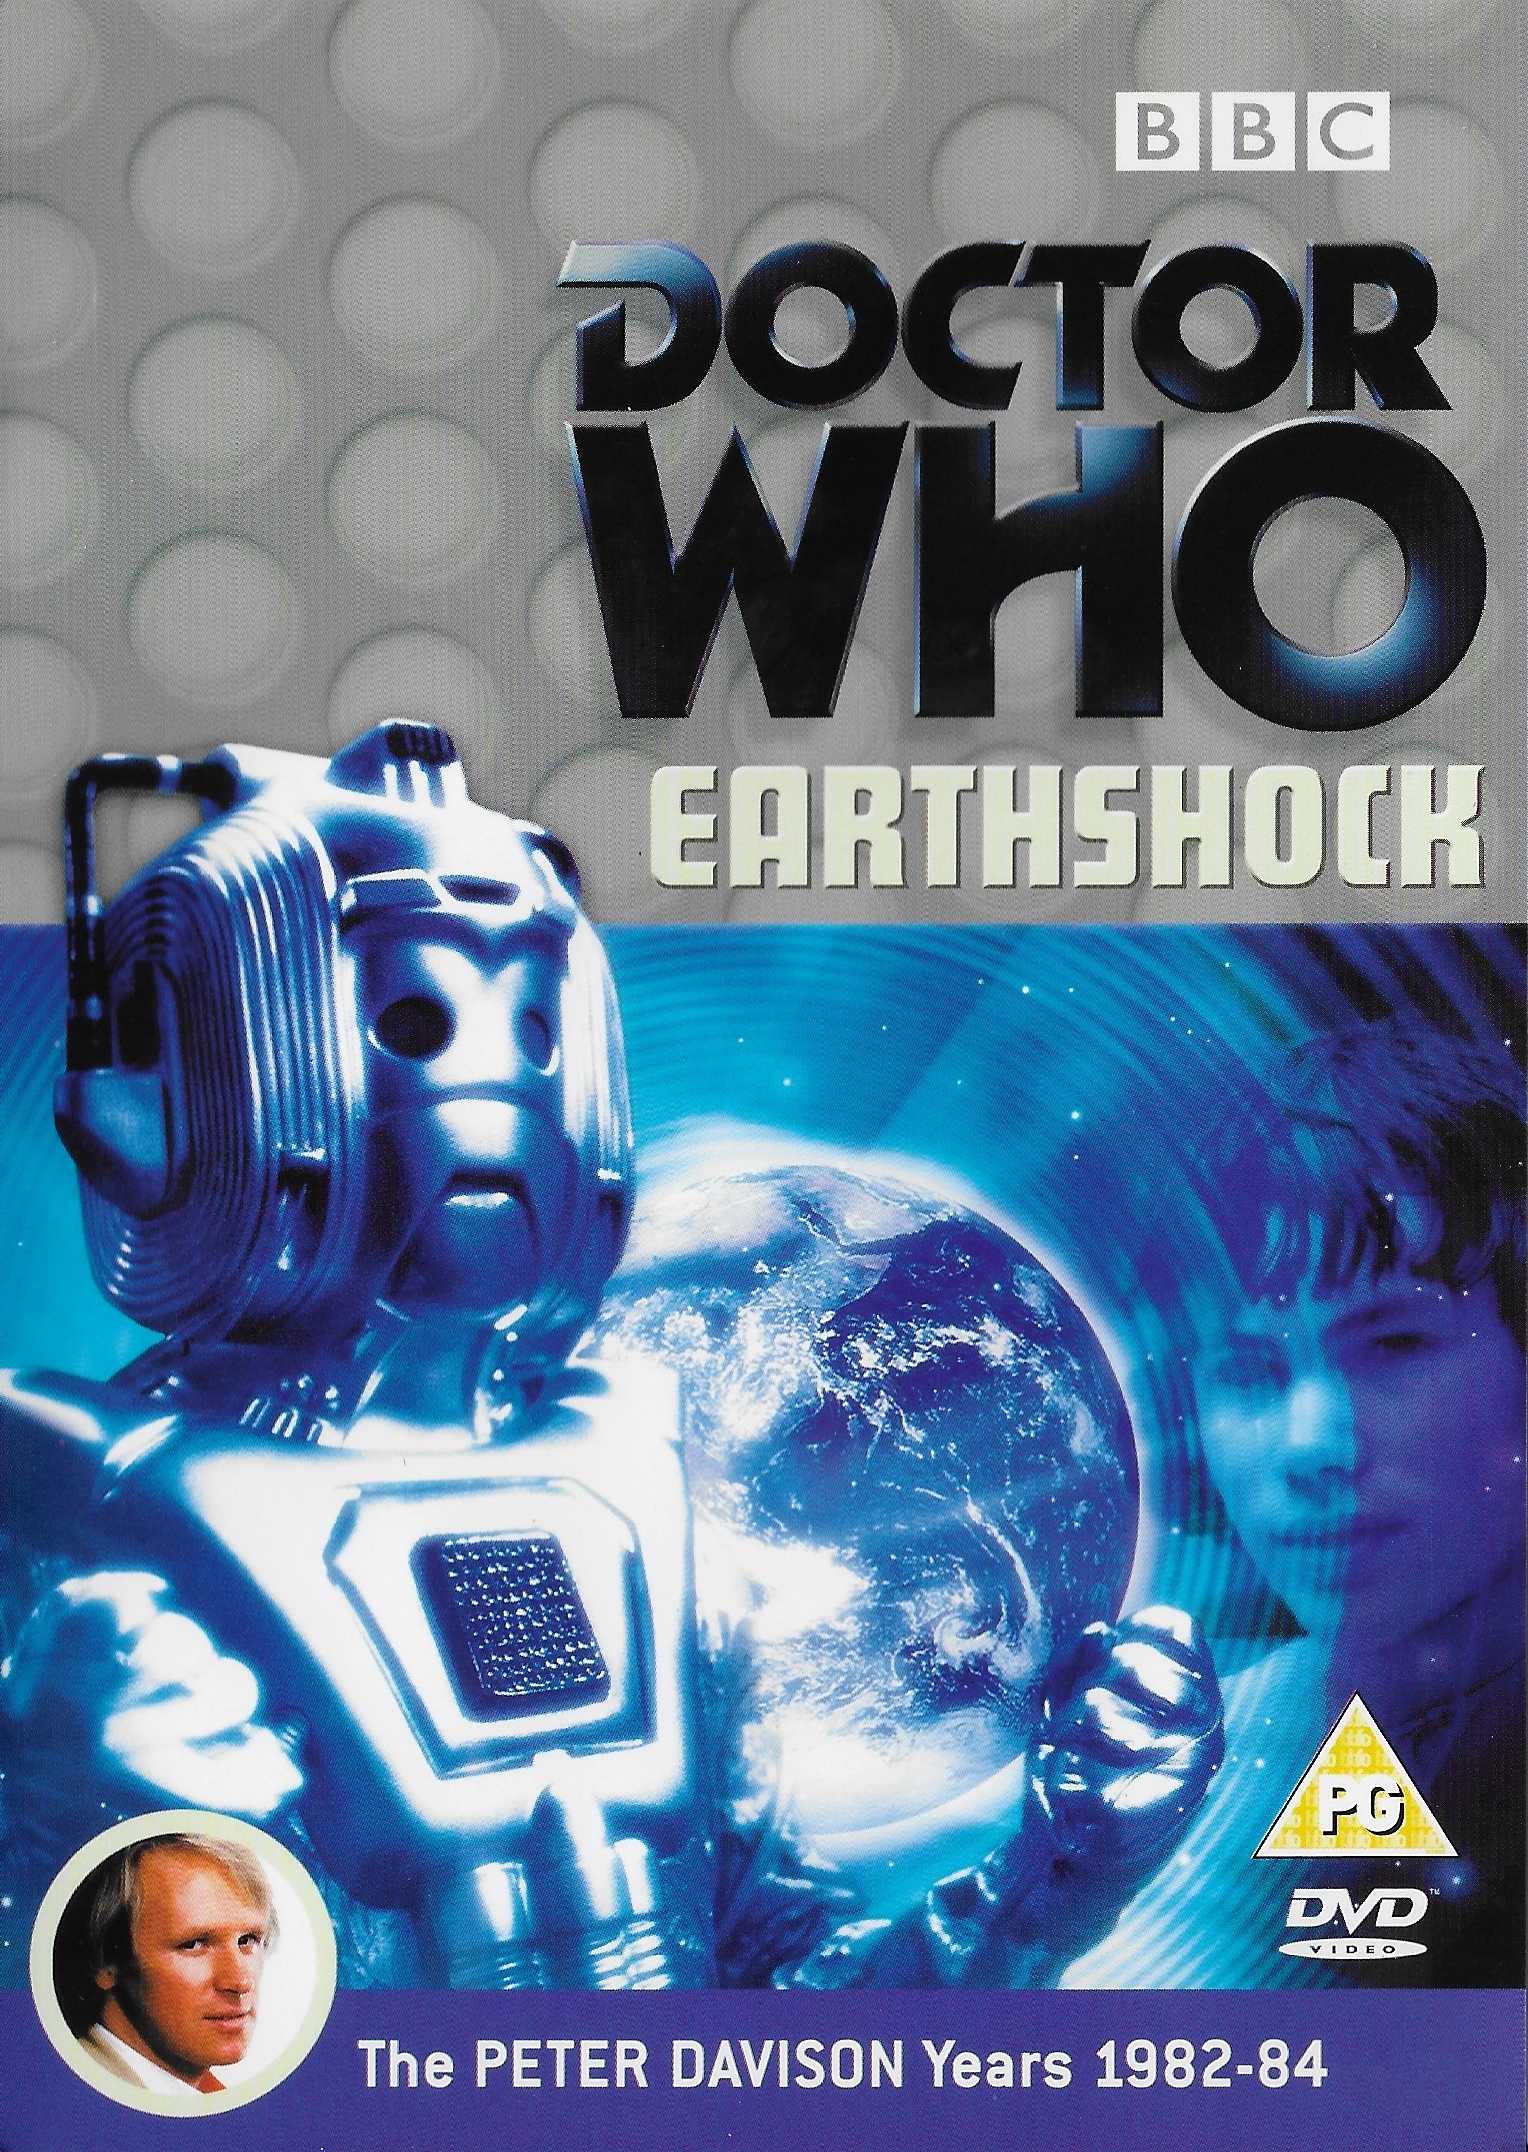 Picture of BBCDVD 1153 Doctor Who - Earthshock by artist Eric Saward from the BBC dvds - Records and Tapes library